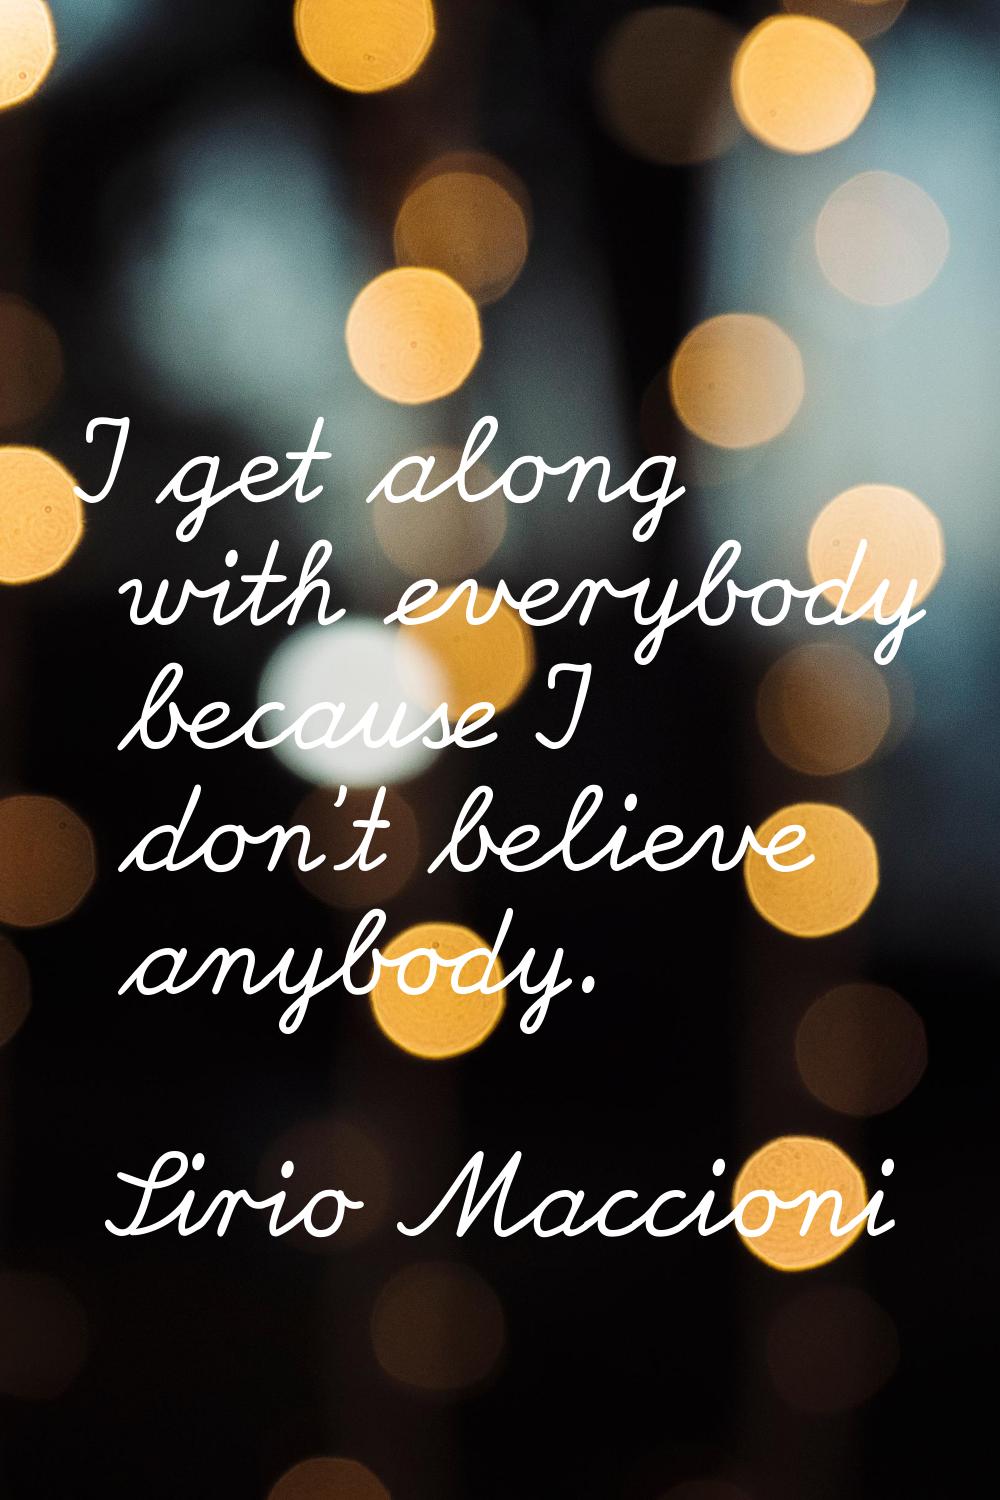 I get along with everybody because I don't believe anybody.